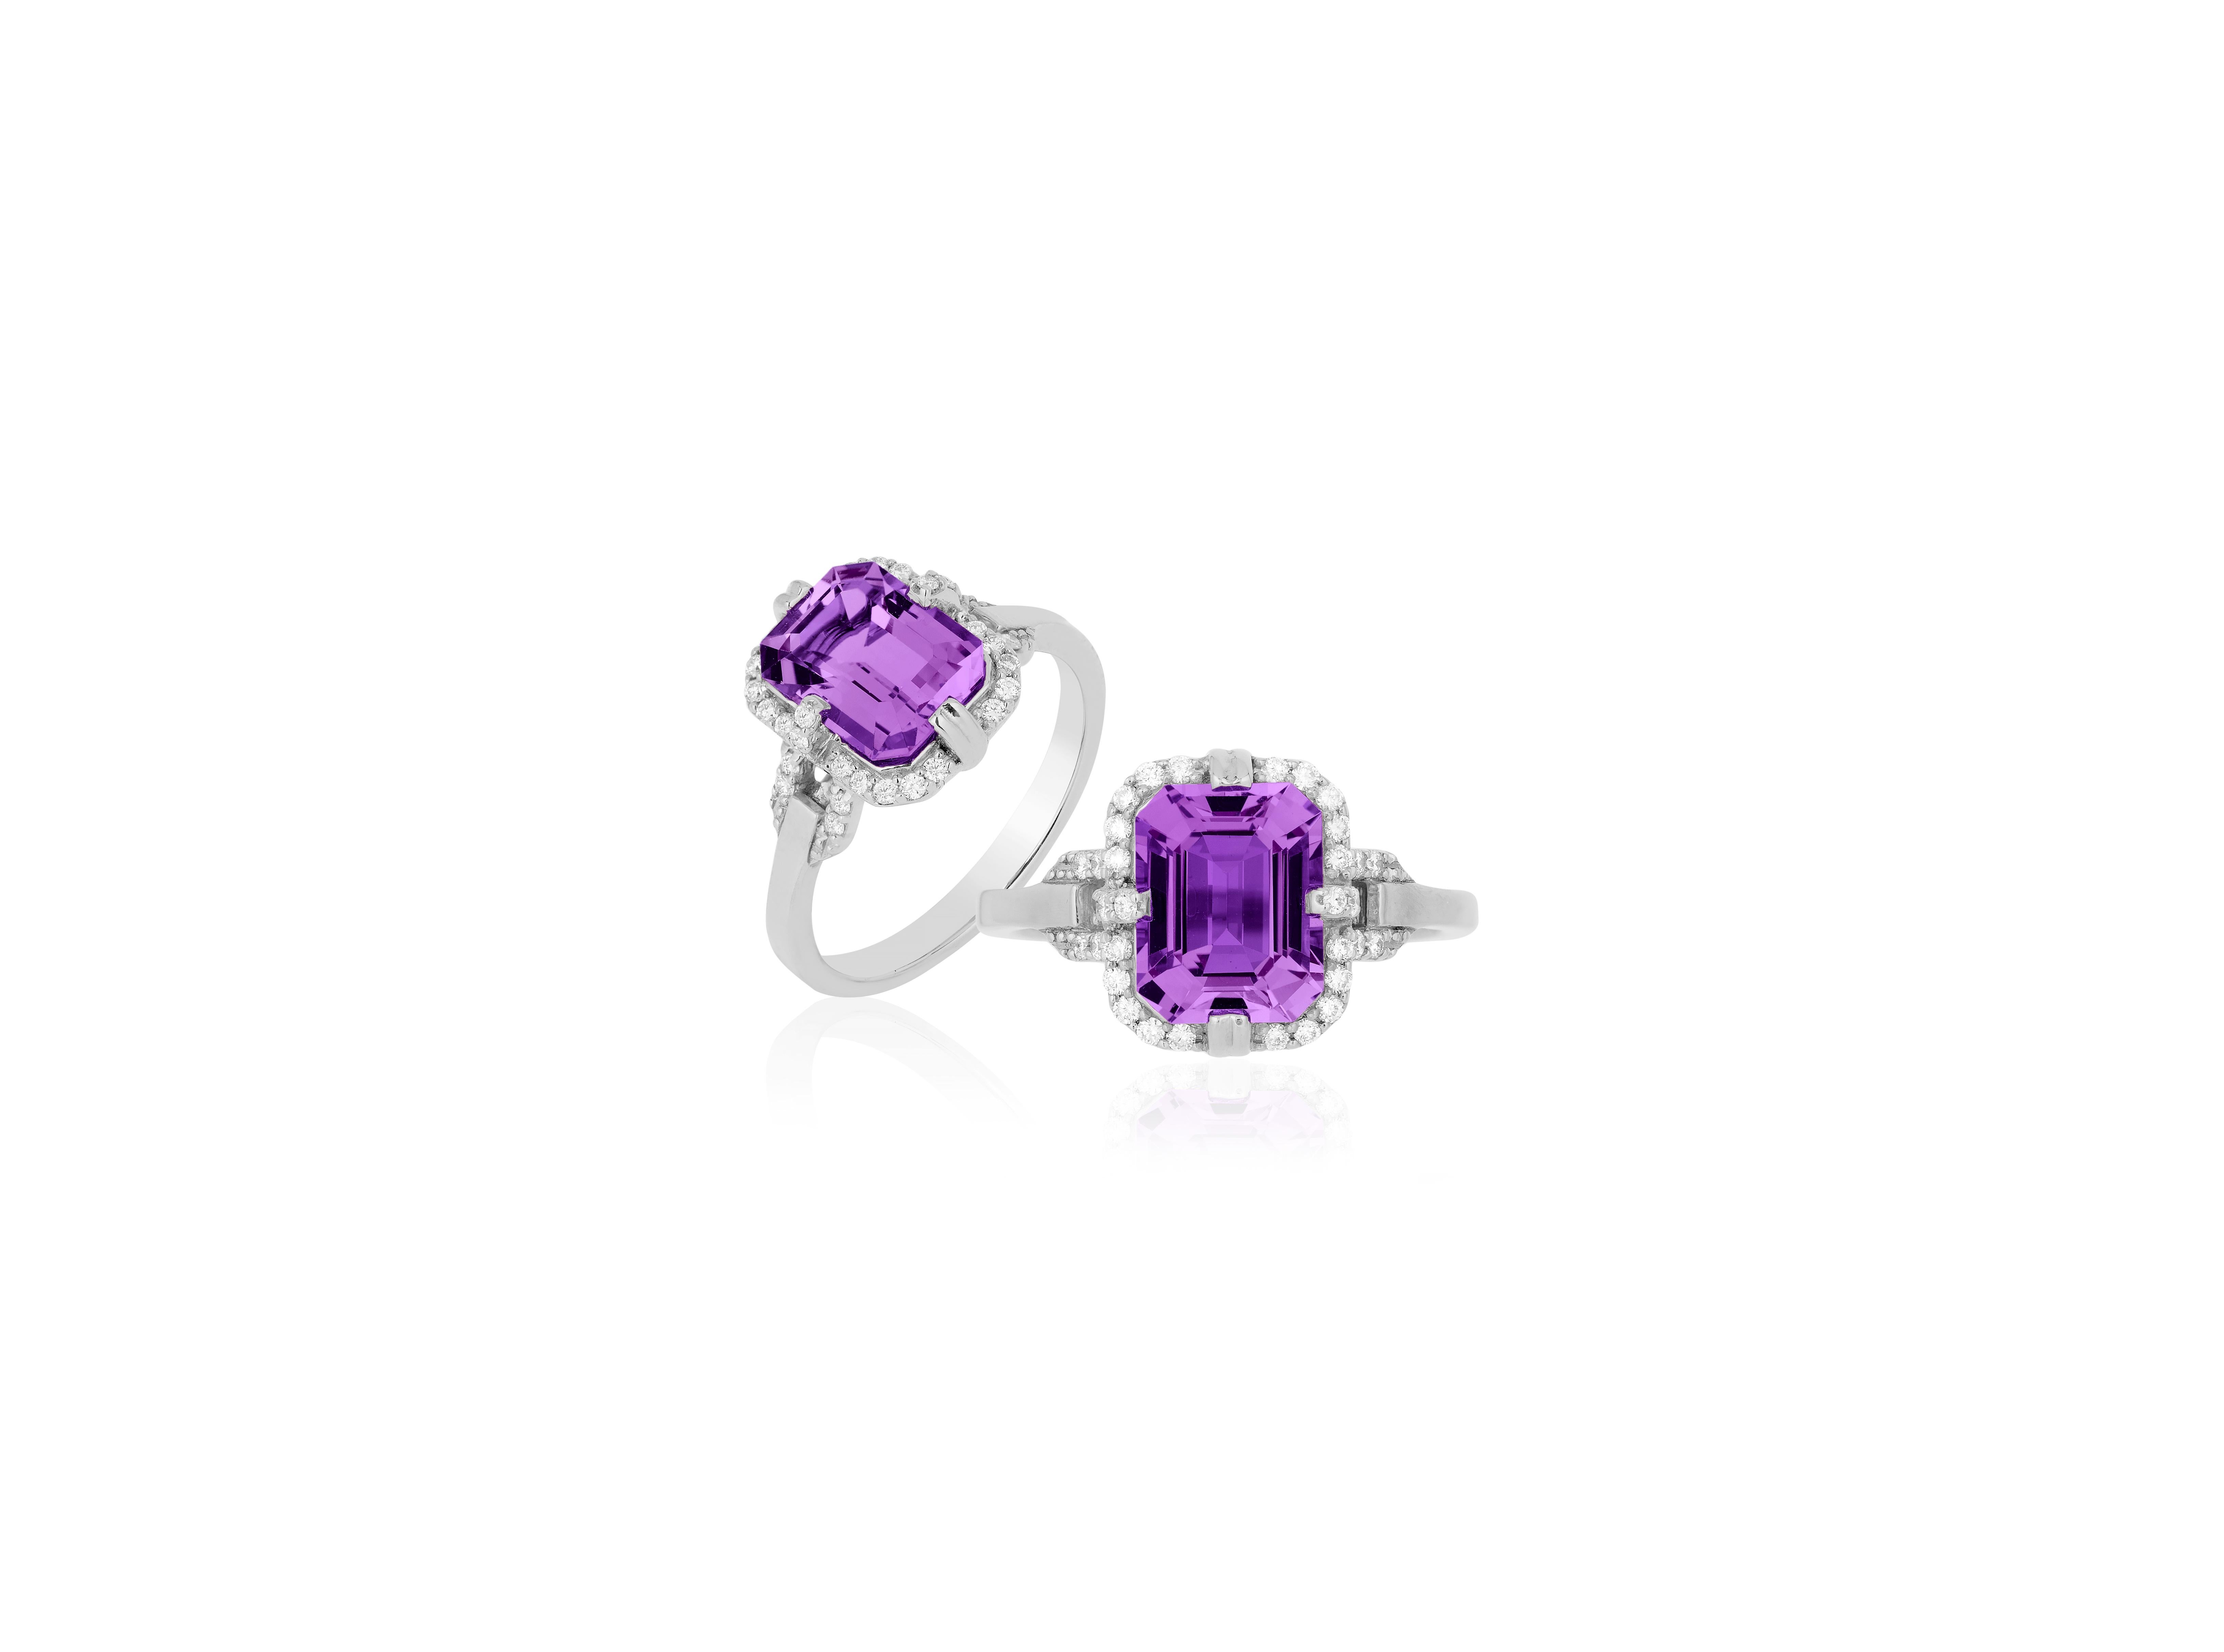 Amethyst Emerald Cut Ring in 18K White Gold with Diamonds from 'Gossip' Collection
 Stone Size: 9 x 7 mm 
 Diamonds: G-H / VS, Approx Wt: 0.16 Cts